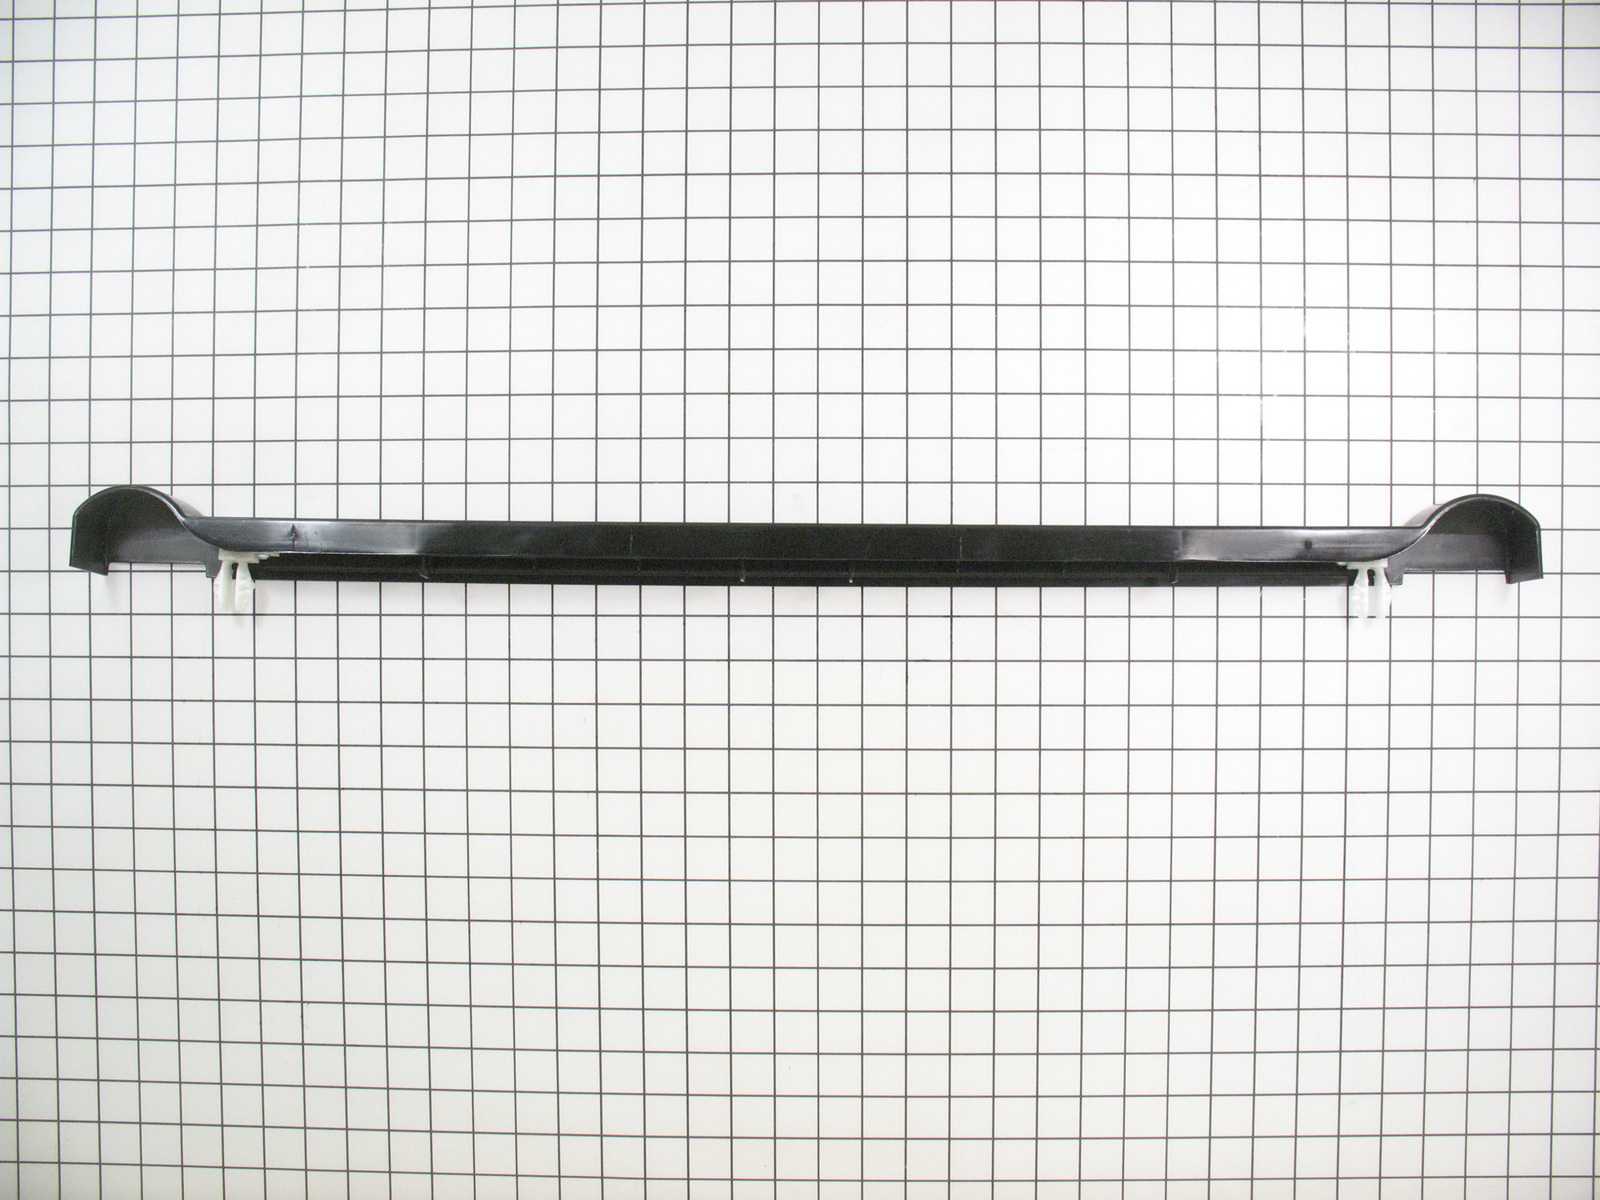 LG Refrigerator Kick Plate Grille Lower Cover. Part #3550JJ0006C-USED